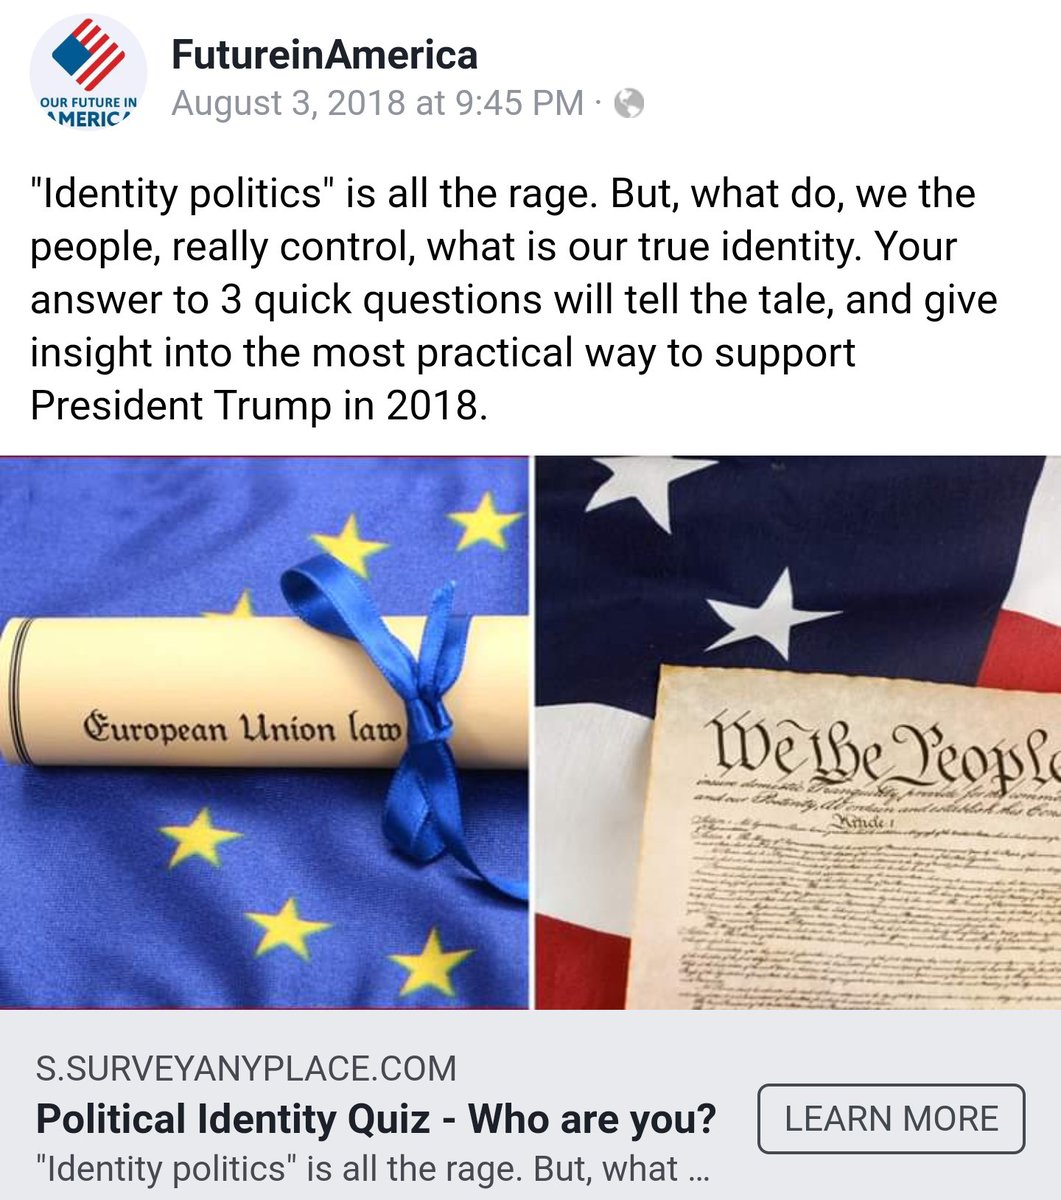 In this brief SA FB survey, it first asks you to "identify" yourself as either 1) "not patriotic" and anti-Trump or 2) "patriotic" and pro-Trump.Question #2 depends on what one answers for #1, and only suggests not voting in 2018 as an option to non-Trump supporters. /20